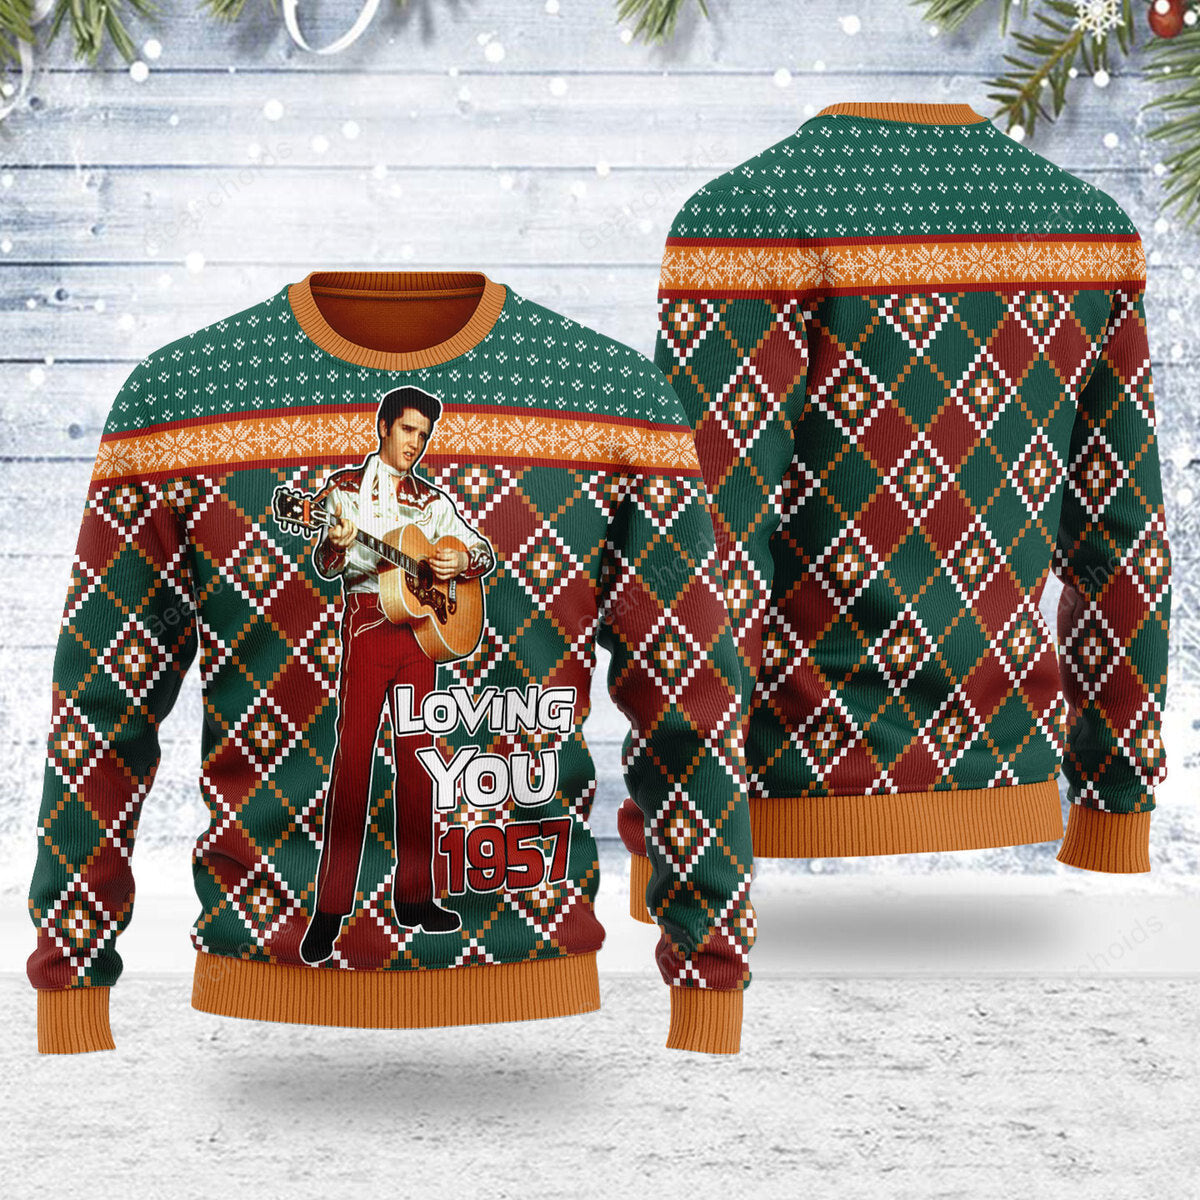 Elvis 'Loving You' 1957  - Ugly Christmas Sweater